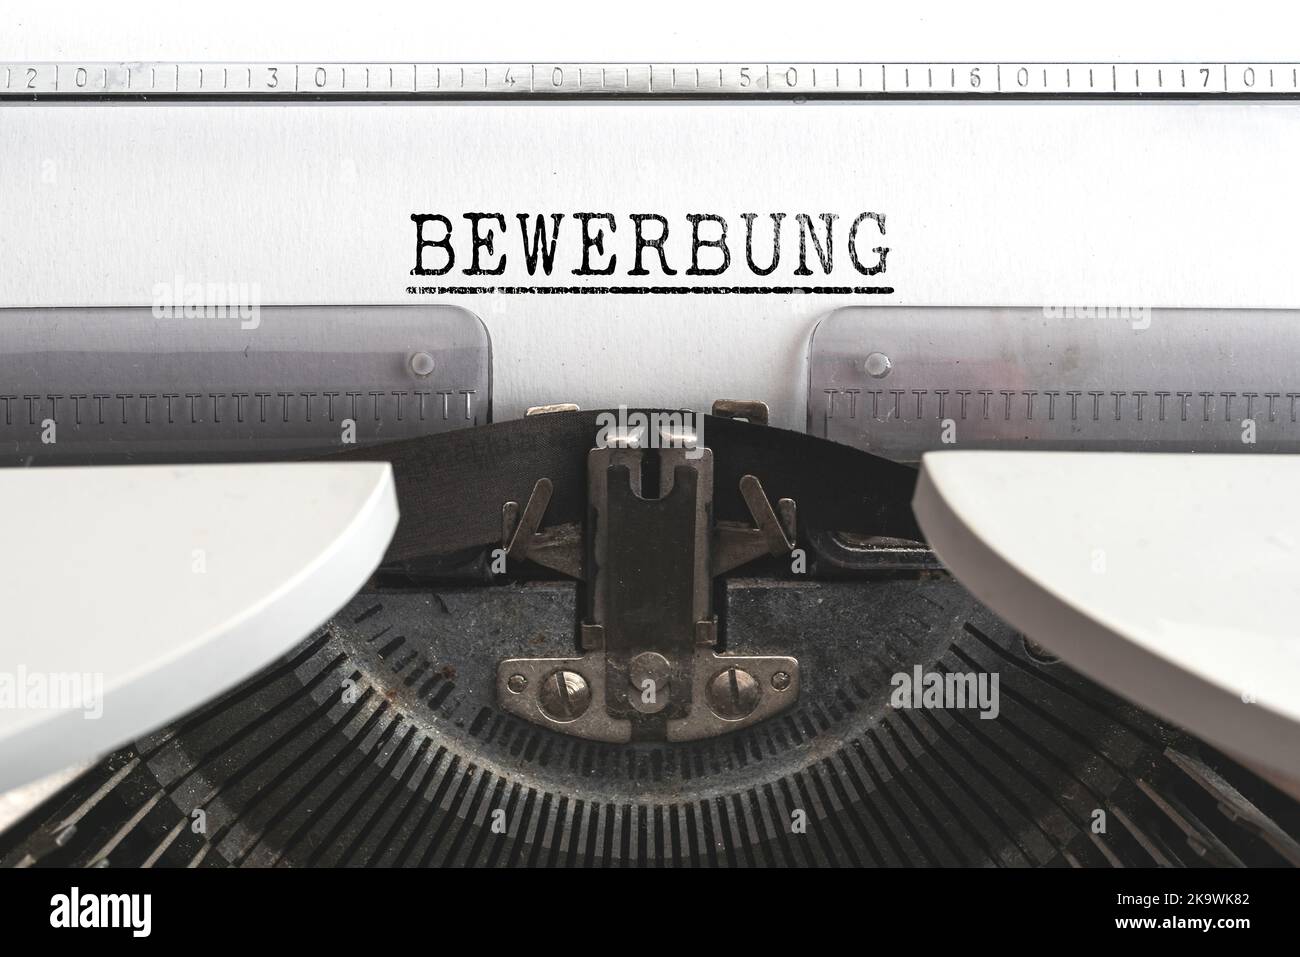 close-up view of word BEWERBUNG, German for job application, written on old mechanical typewriter Stock Photo